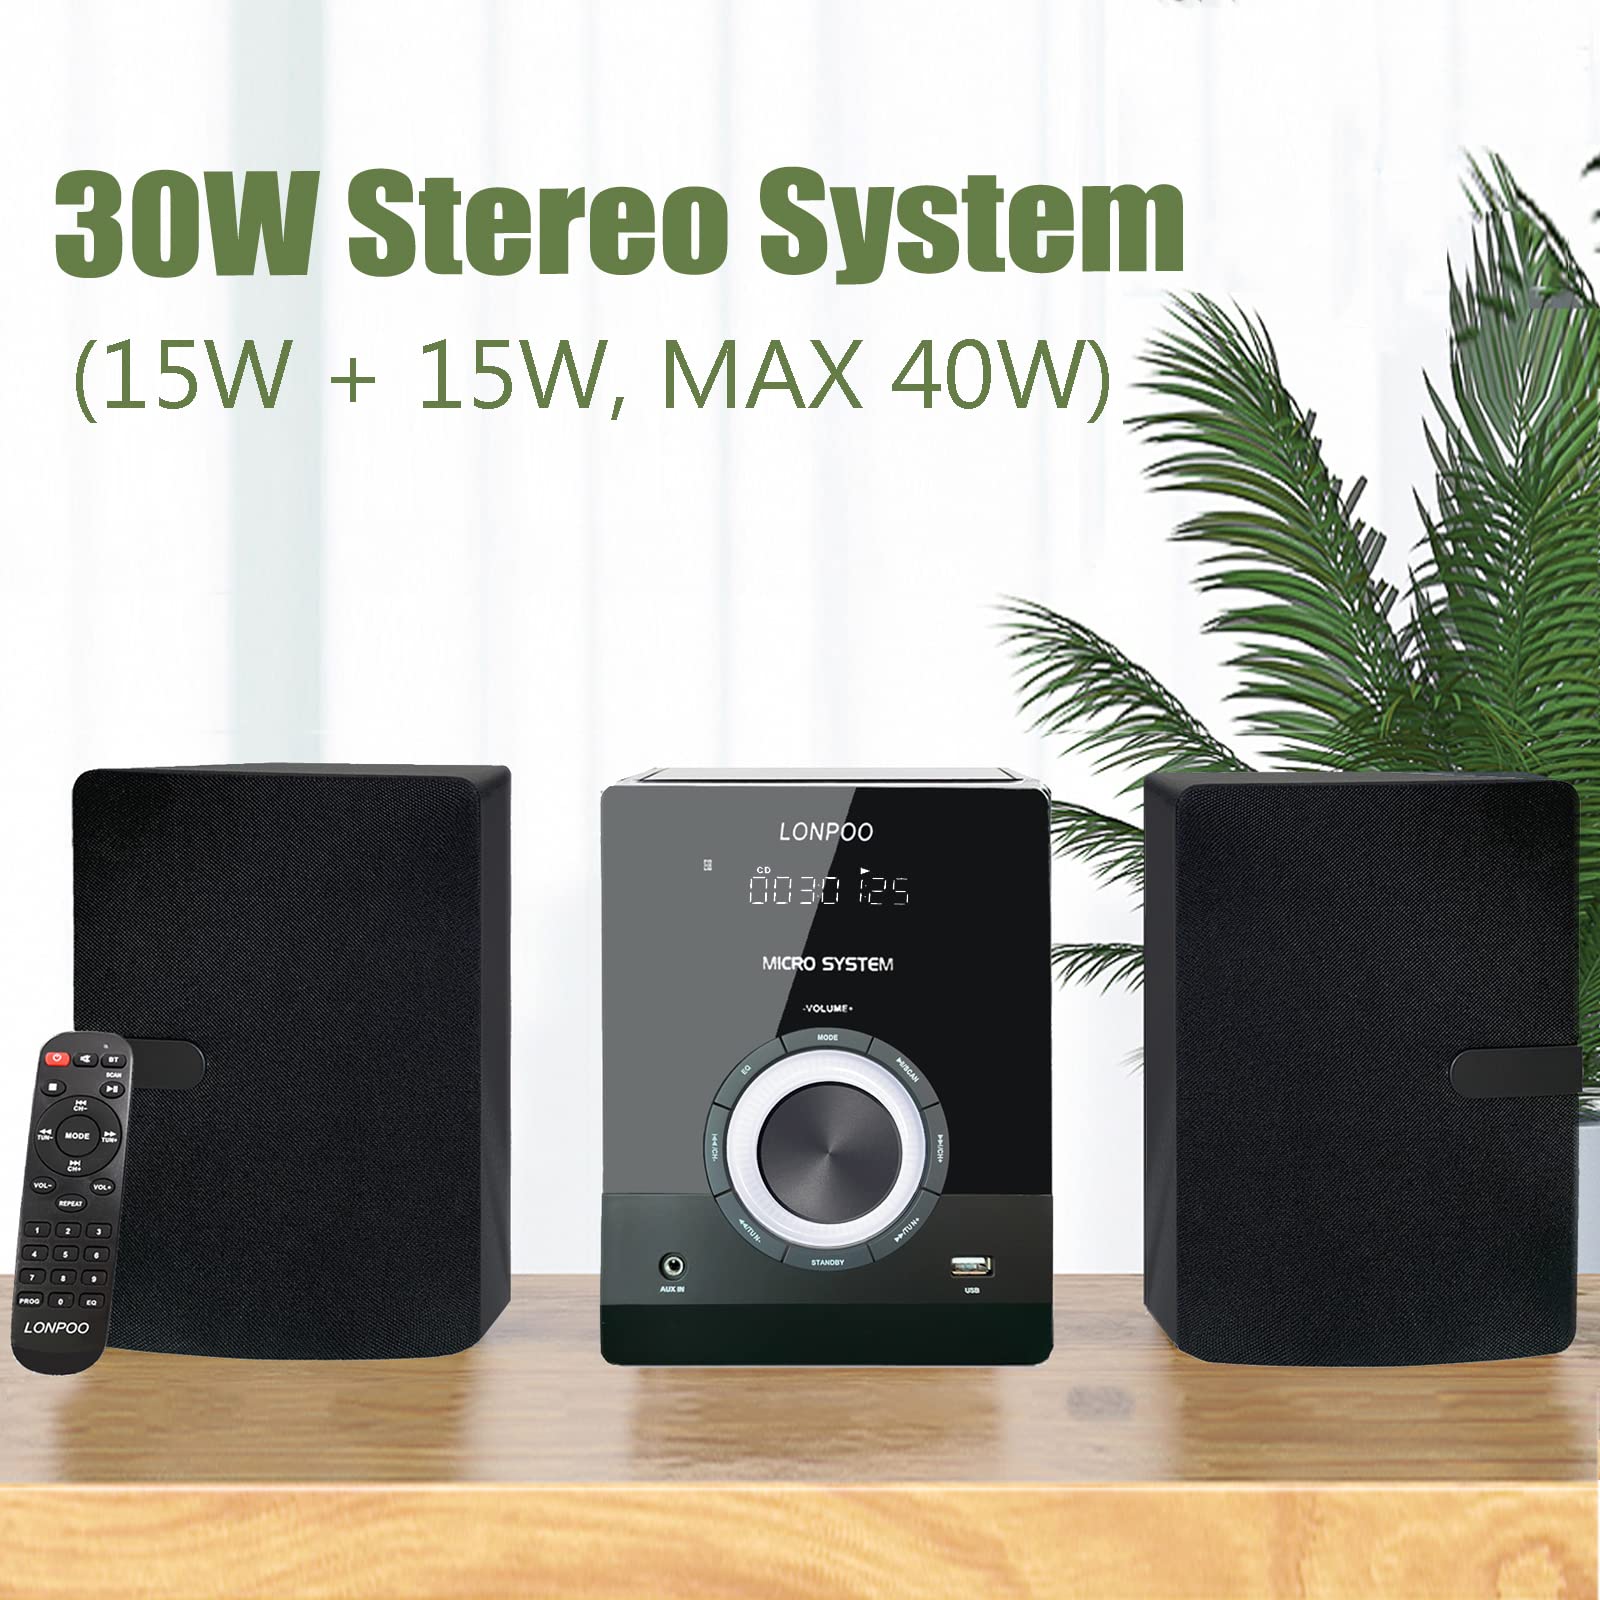 Bluetooth Home Stereo Shelf System - Compact Micro Stereo System with CD Player, FM Radio, Aux-in, USB Playback, 2-Way Music Crisp-Sound, DSP-Tech, Remote Control